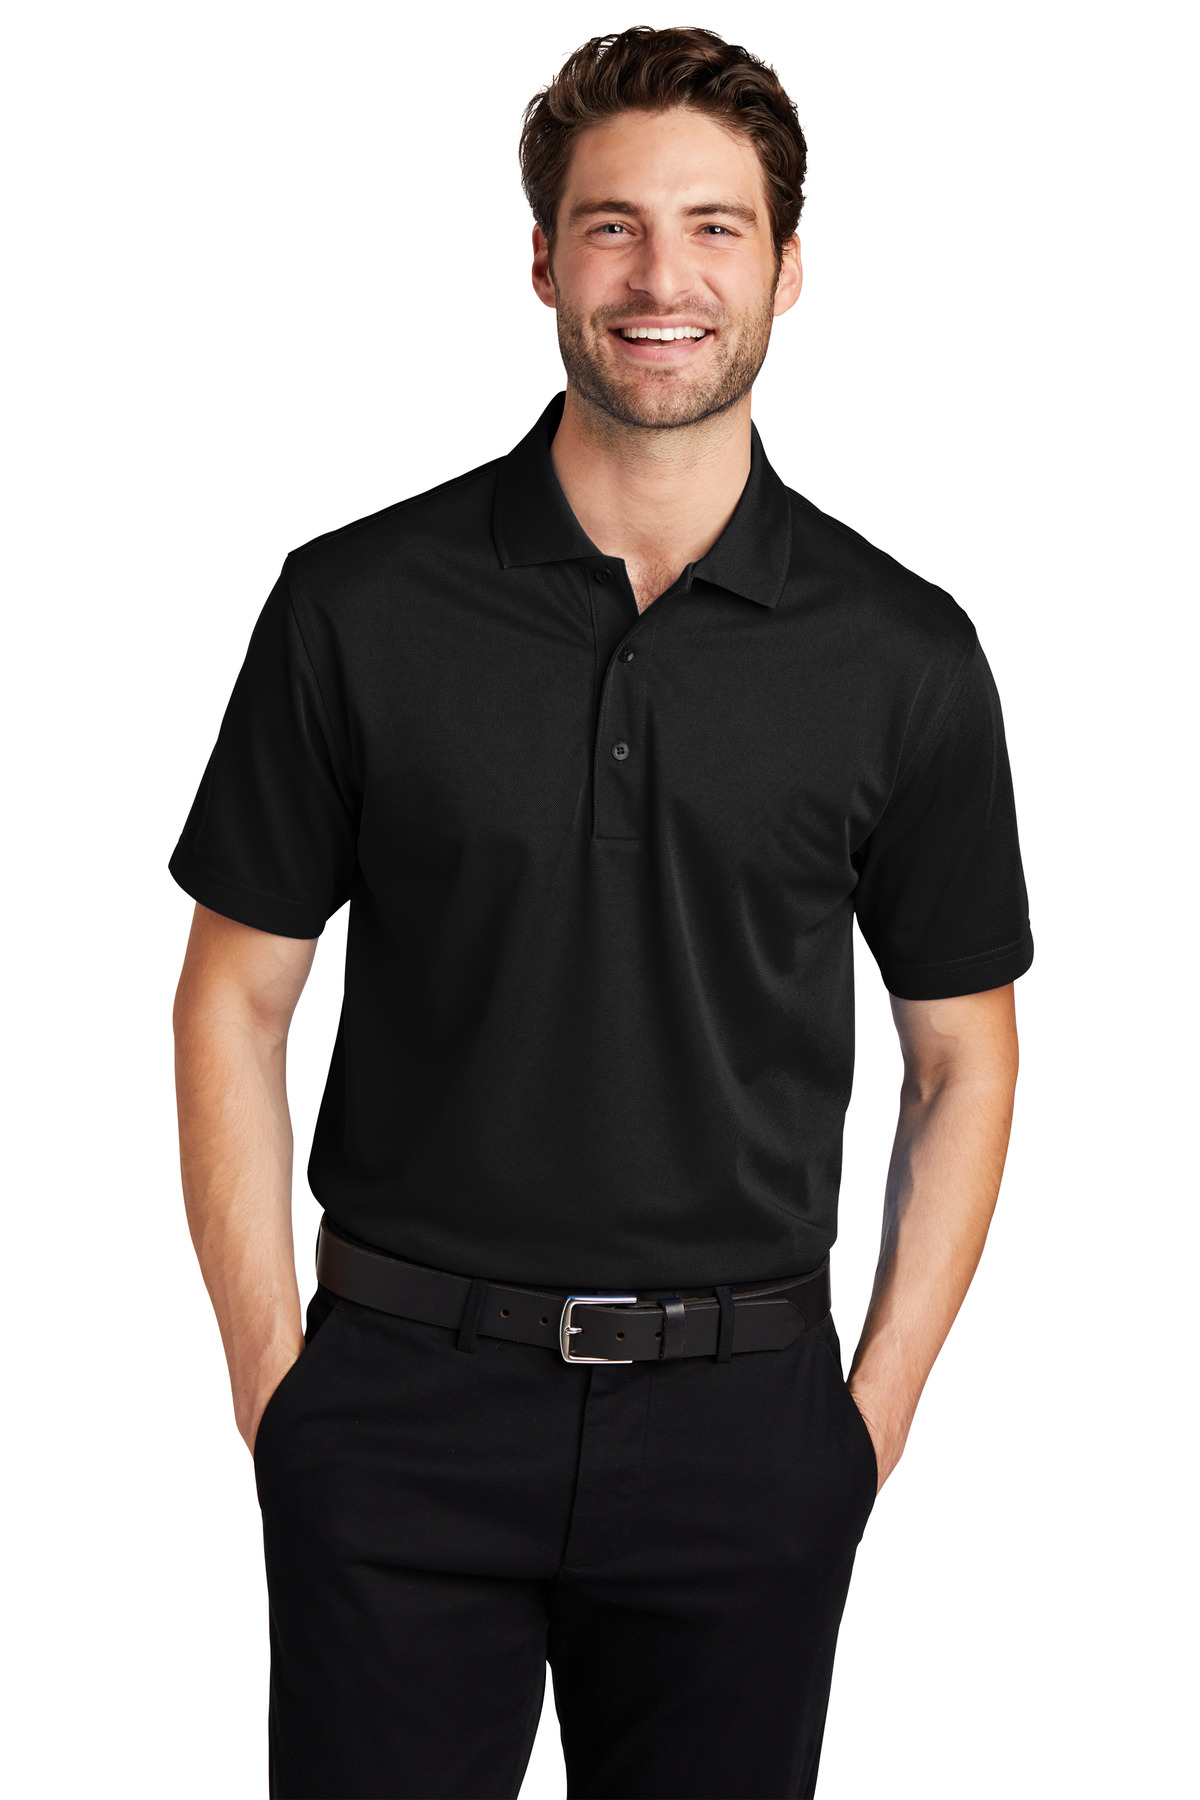 Port Authority Corporate Hospitality Tall Polos&Knits ® Tall Tech Pique Polo.-Port Authority